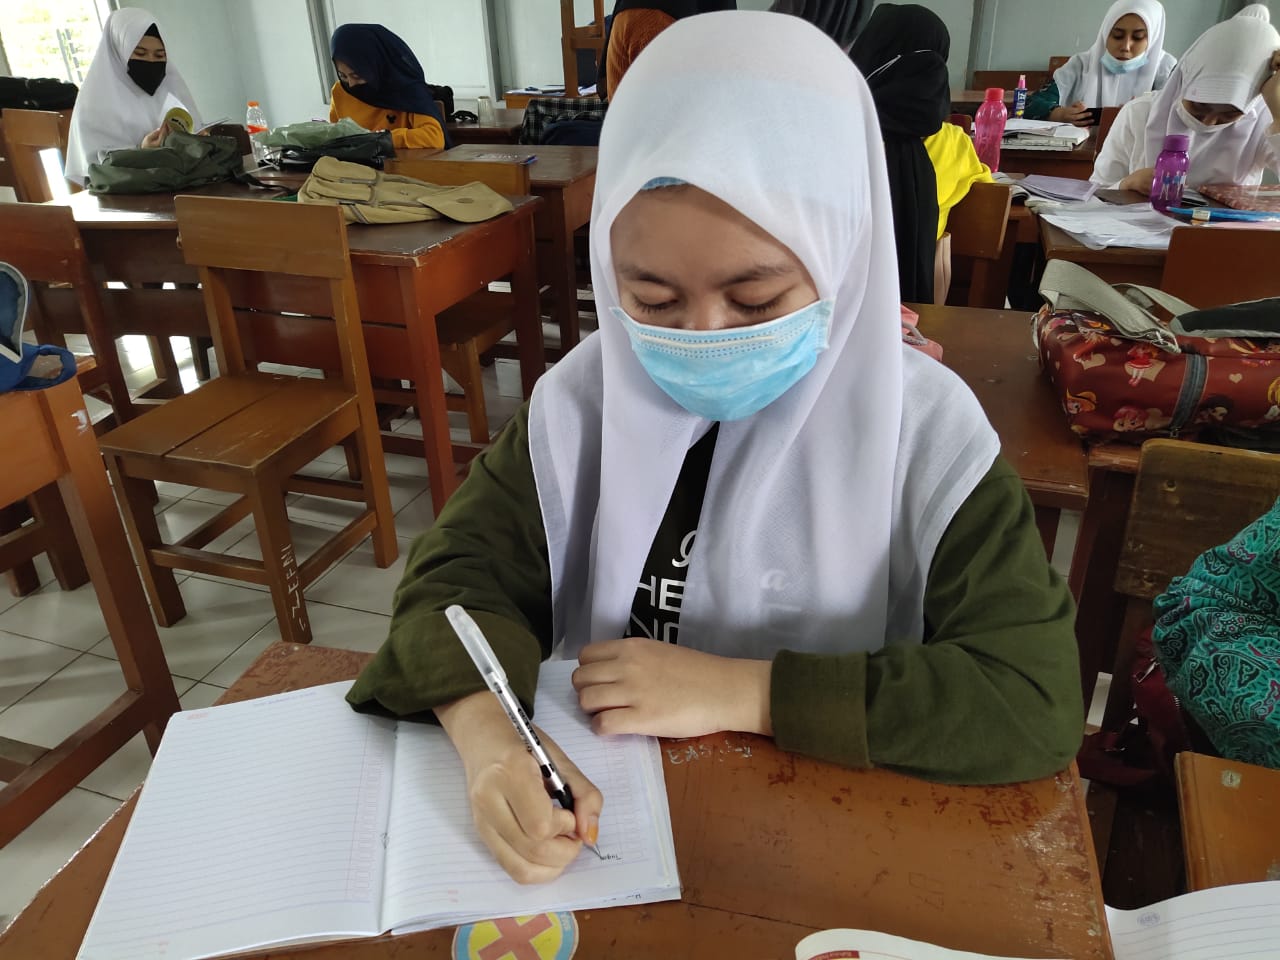 Among millions of students who are affected by the COVID-19 pandemic, Heni is struggling to keep learning. She is one of the students in rural Indonesia who is in YUM’s sponsorship program.